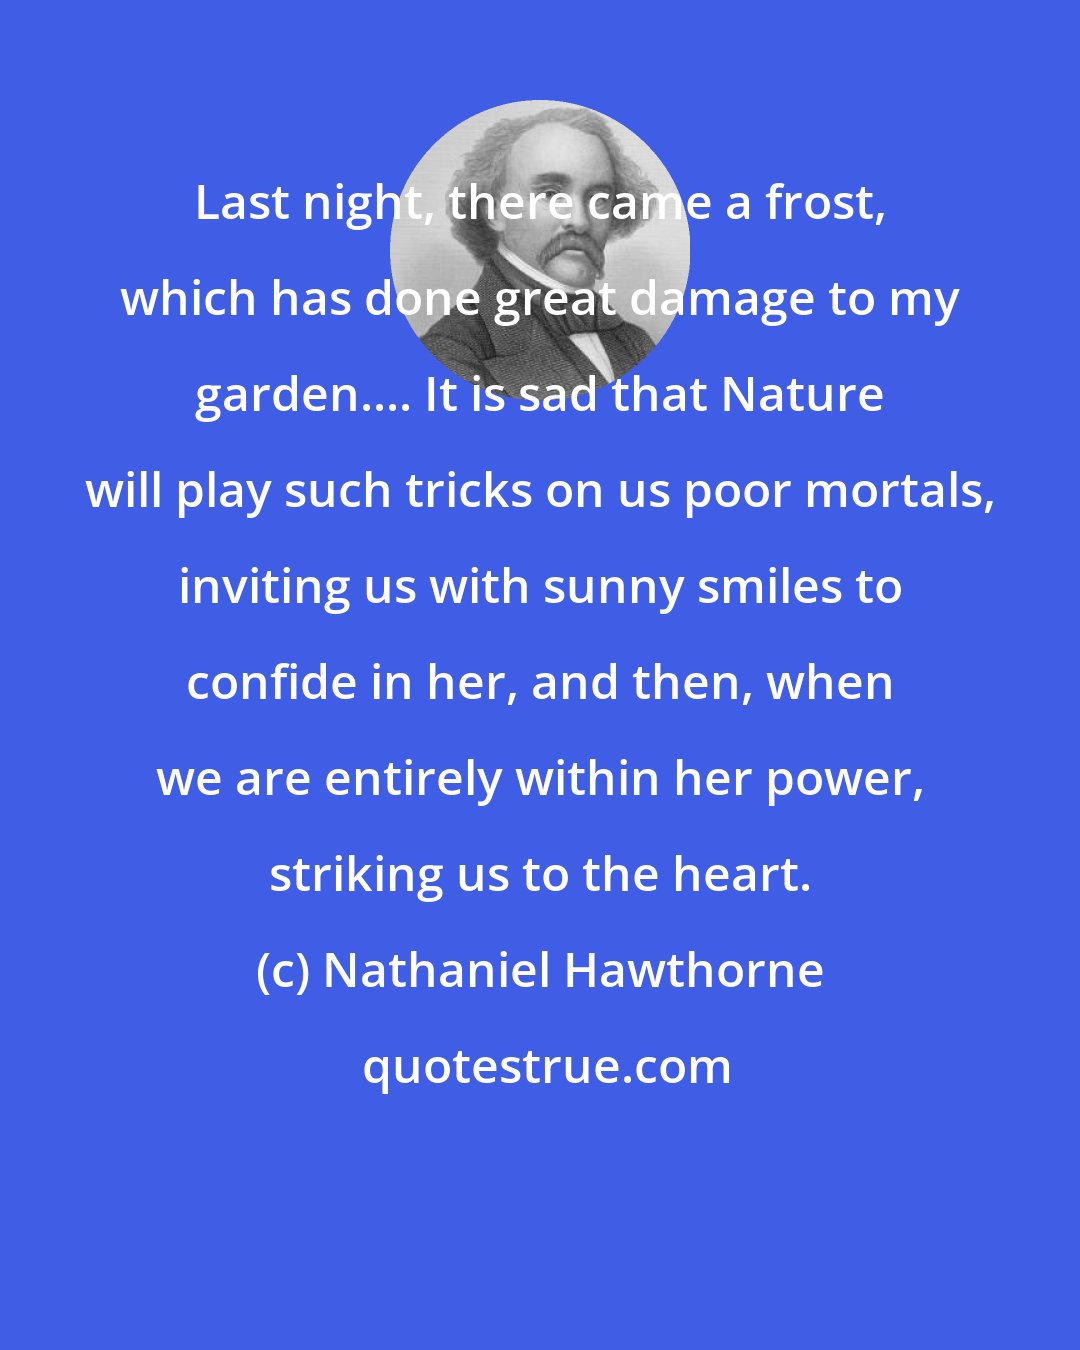 Nathaniel Hawthorne: Last night, there came a frost, which has done great damage to my garden.... It is sad that Nature will play such tricks on us poor mortals, inviting us with sunny smiles to confide in her, and then, when we are entirely within her power, striking us to the heart.